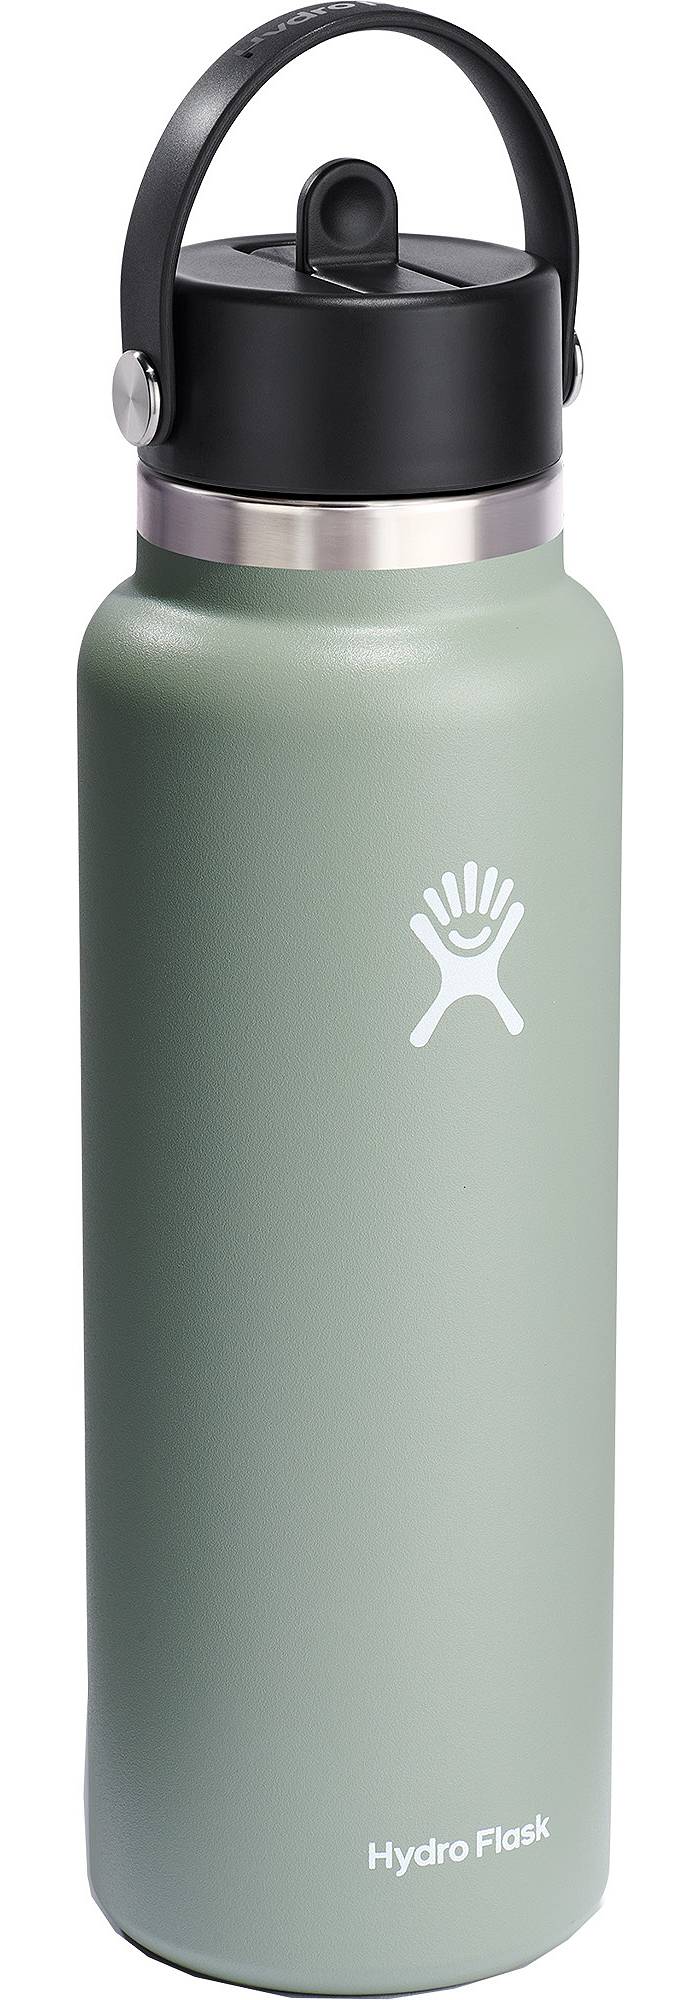 Hydro Flask Water Bottle 40 oz, Leak-Proof Flexible Cap - Stainless Steel, Vacuum Insulated Peaceful Valley Color: White